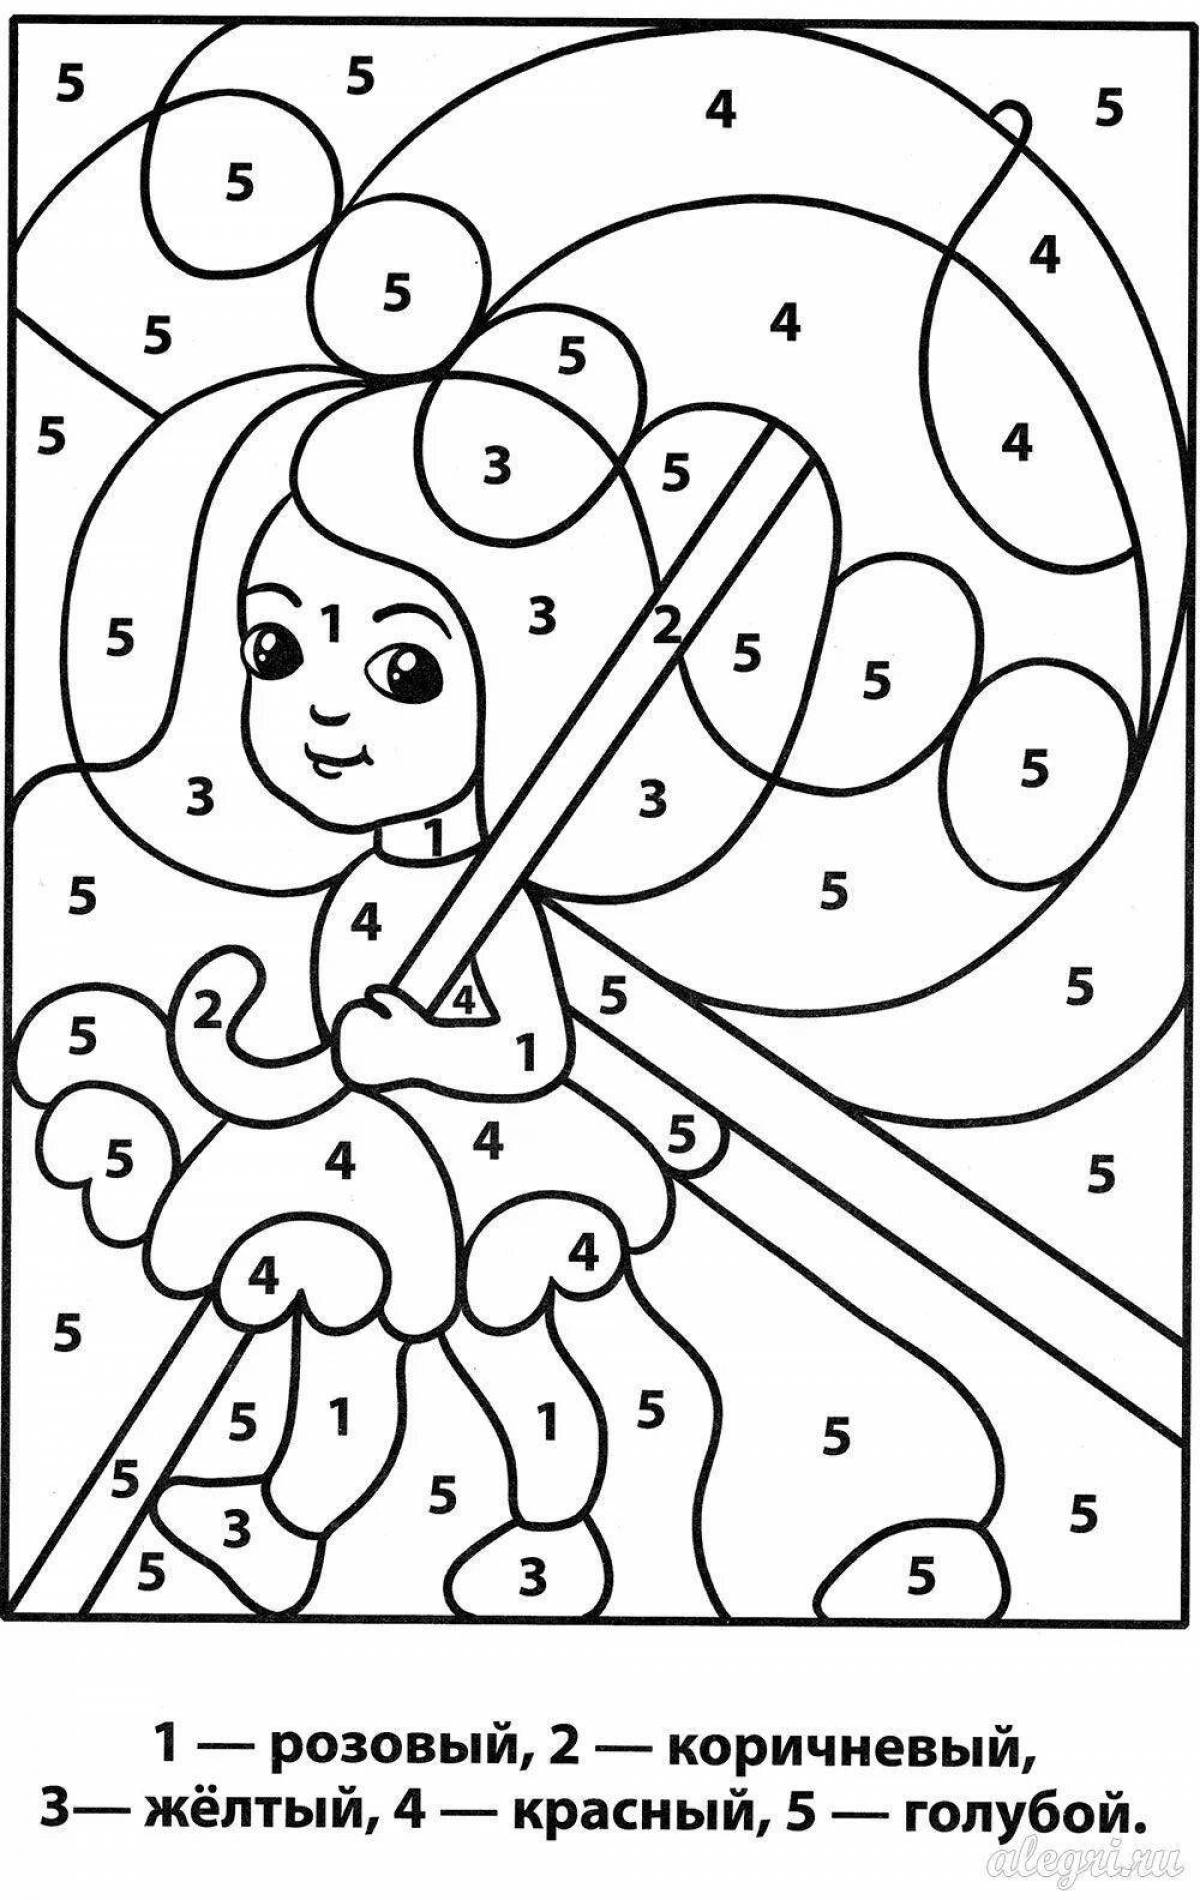 Great coloring game for girls 6-7 years old